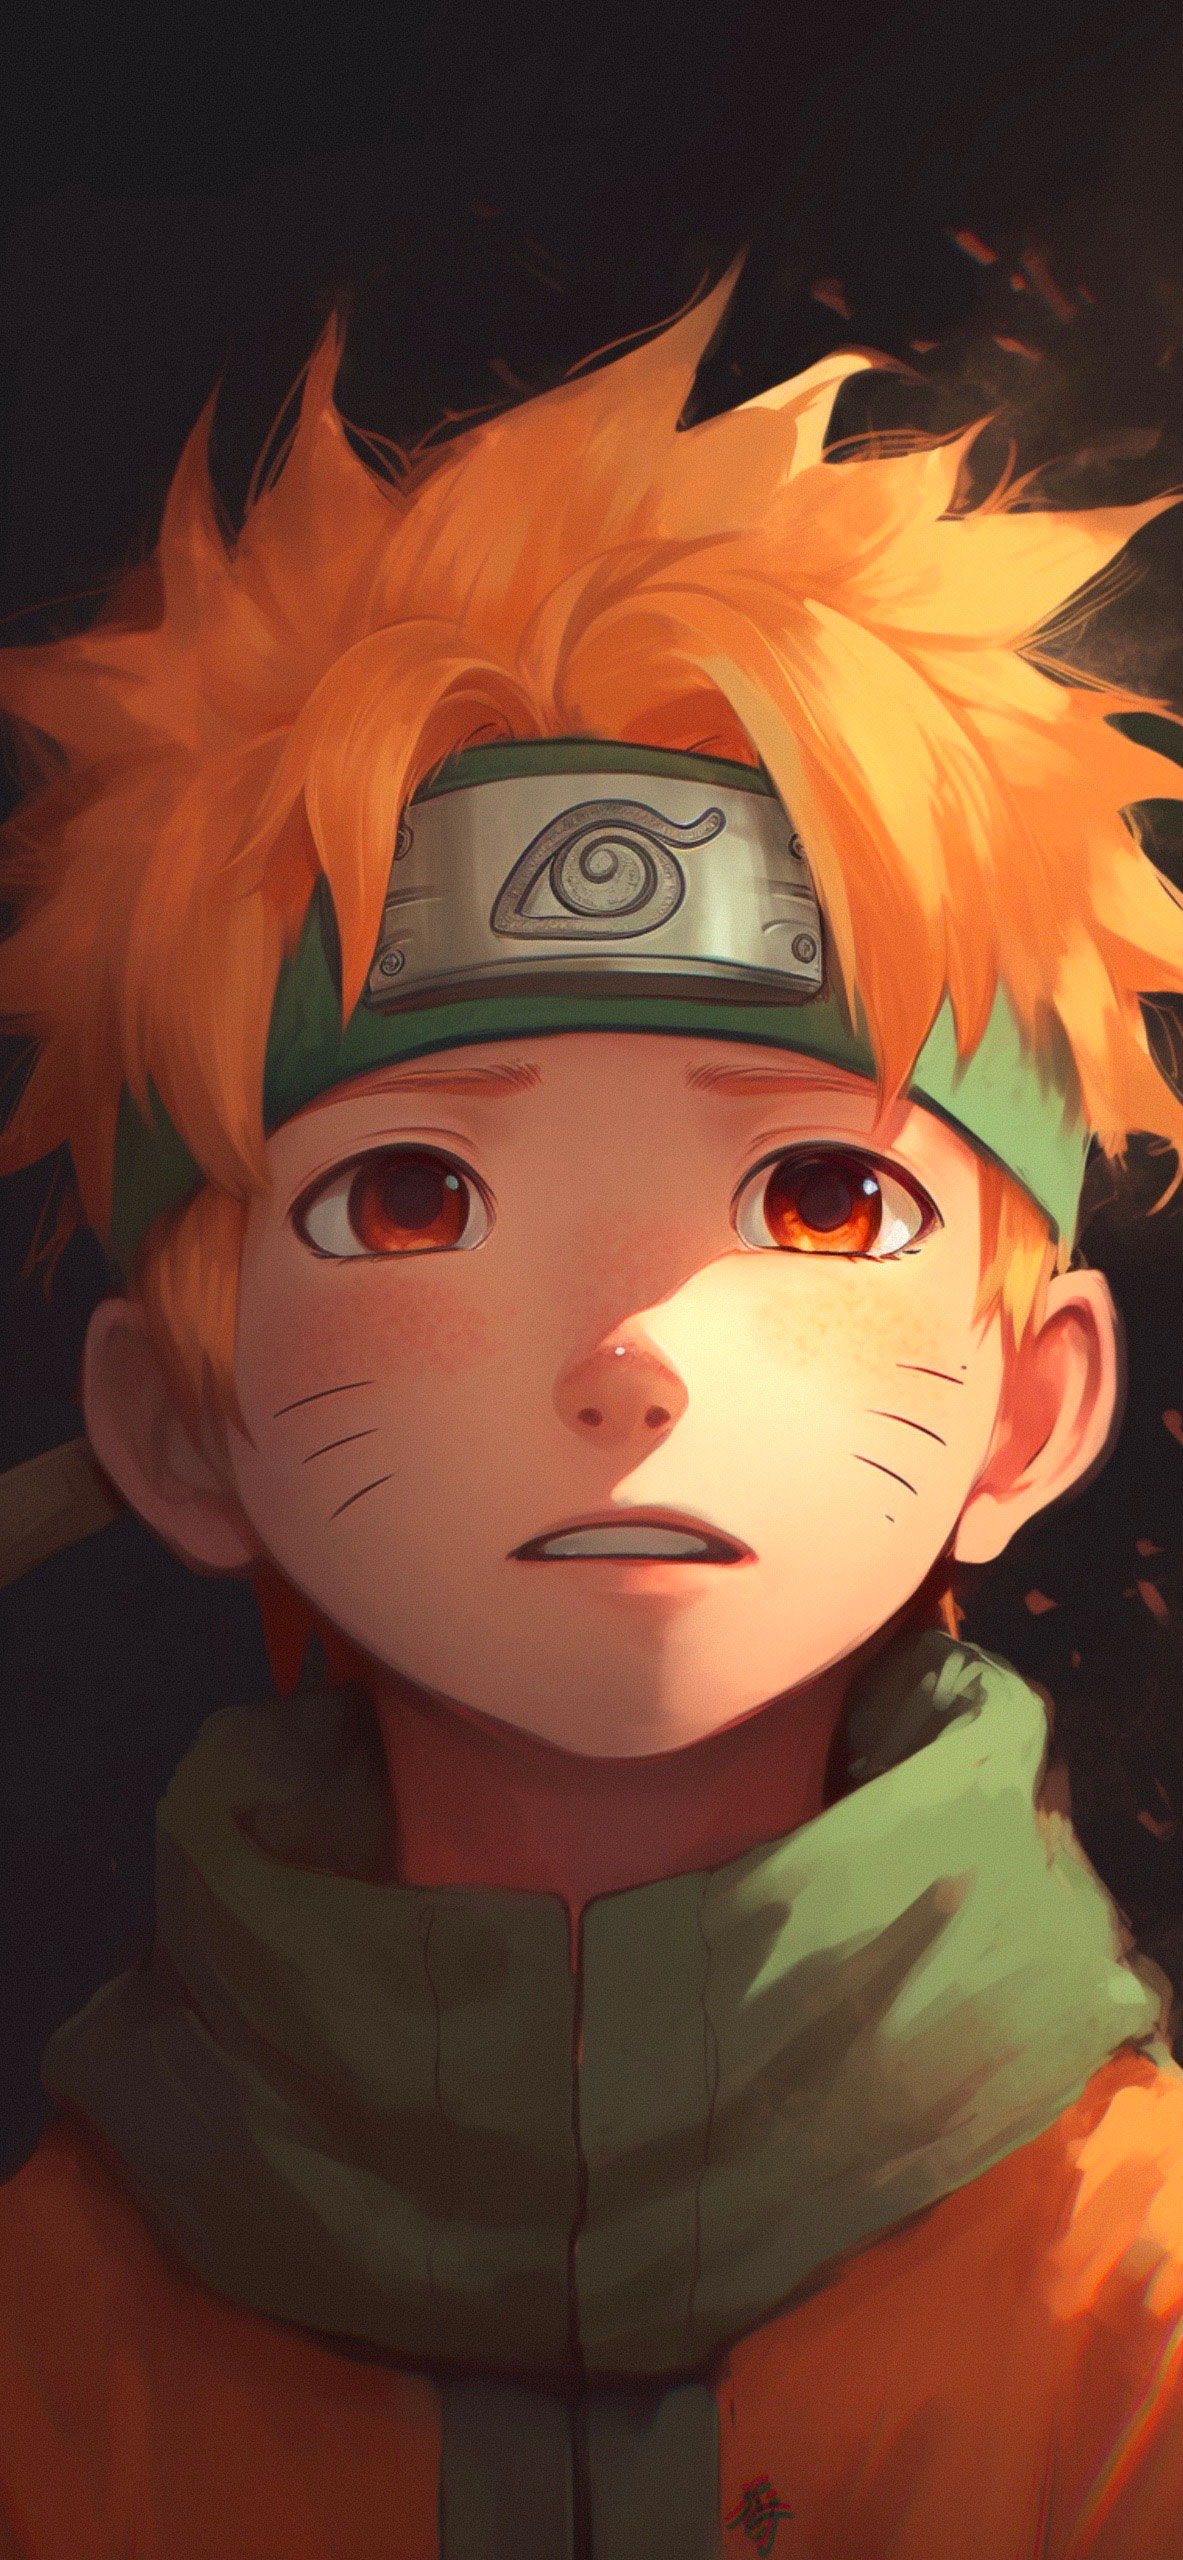 amit barot add cute naruto pictures photo